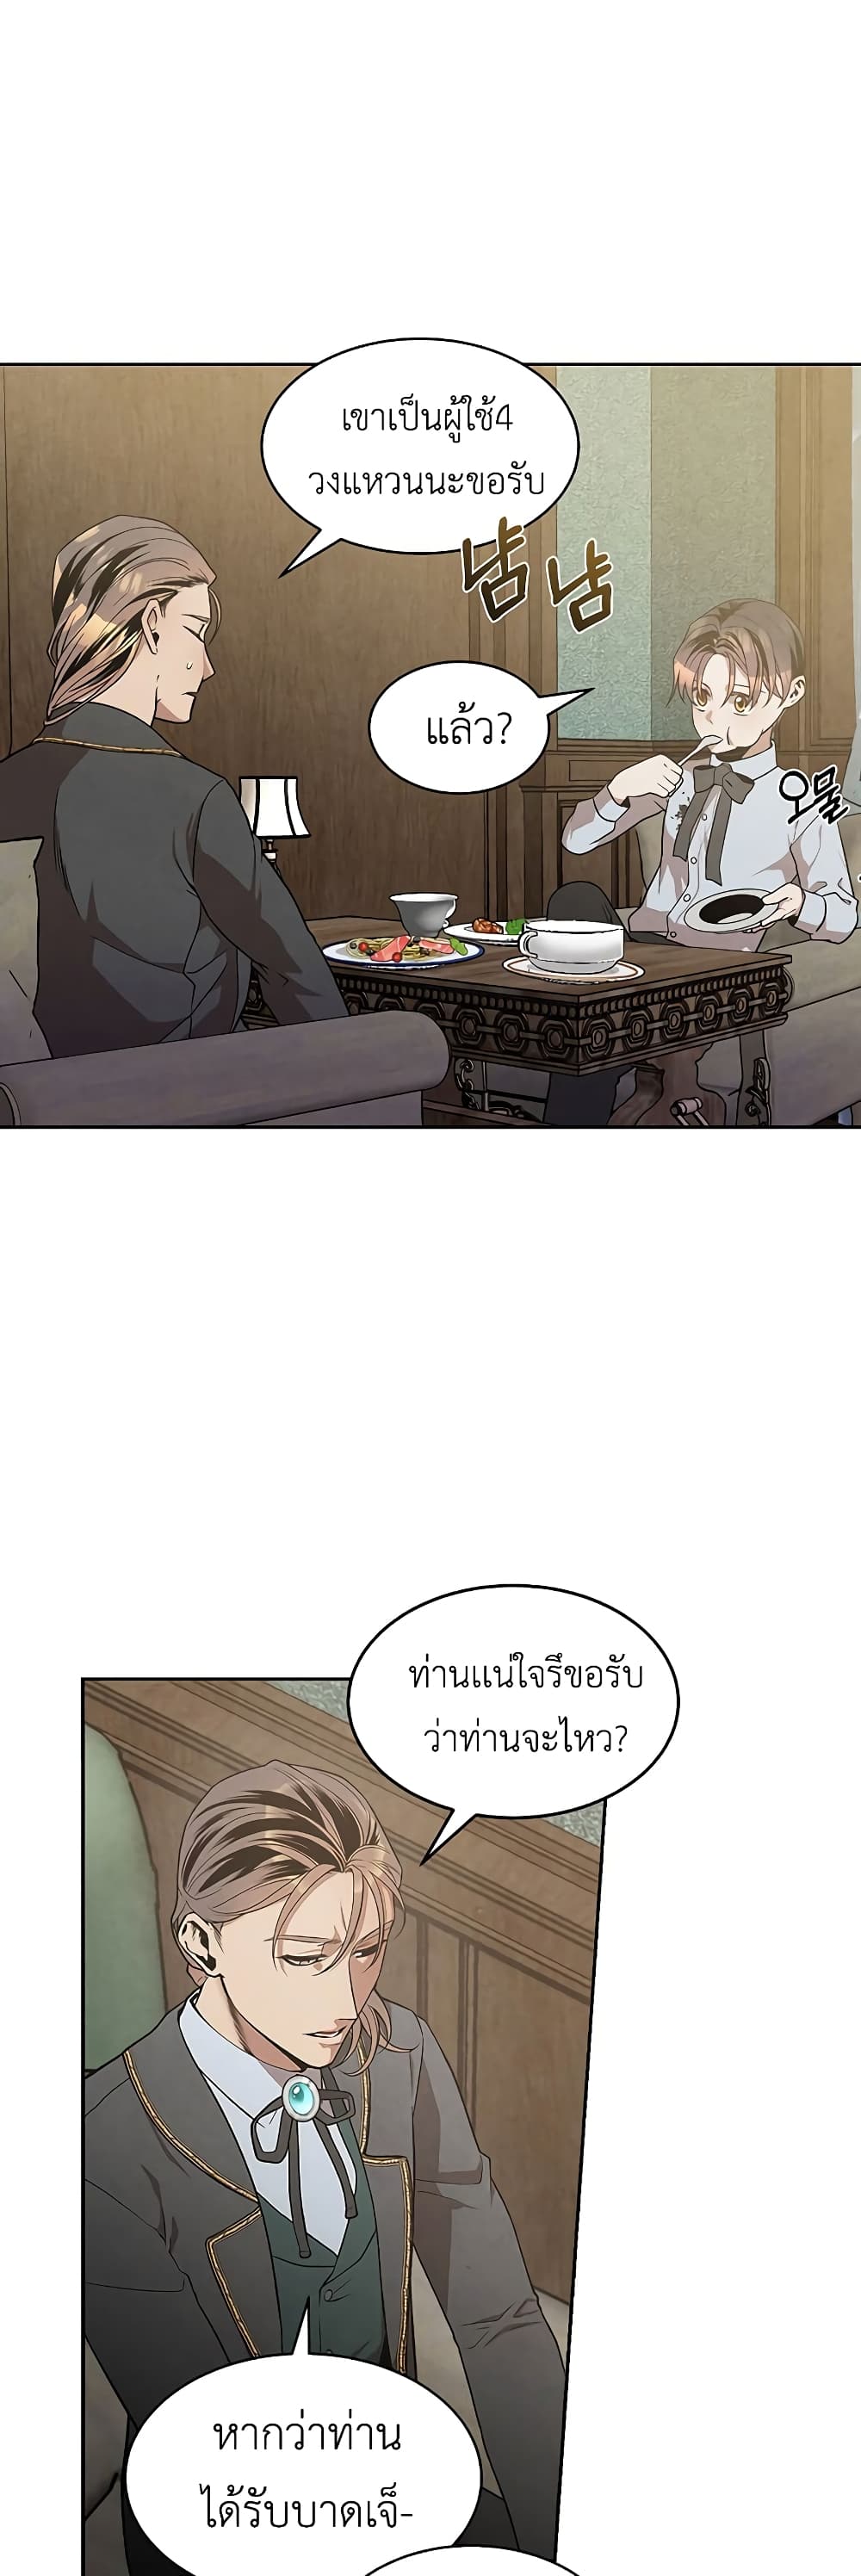 Legendary Youngest Son of the Marquis House 12 แปลไทย